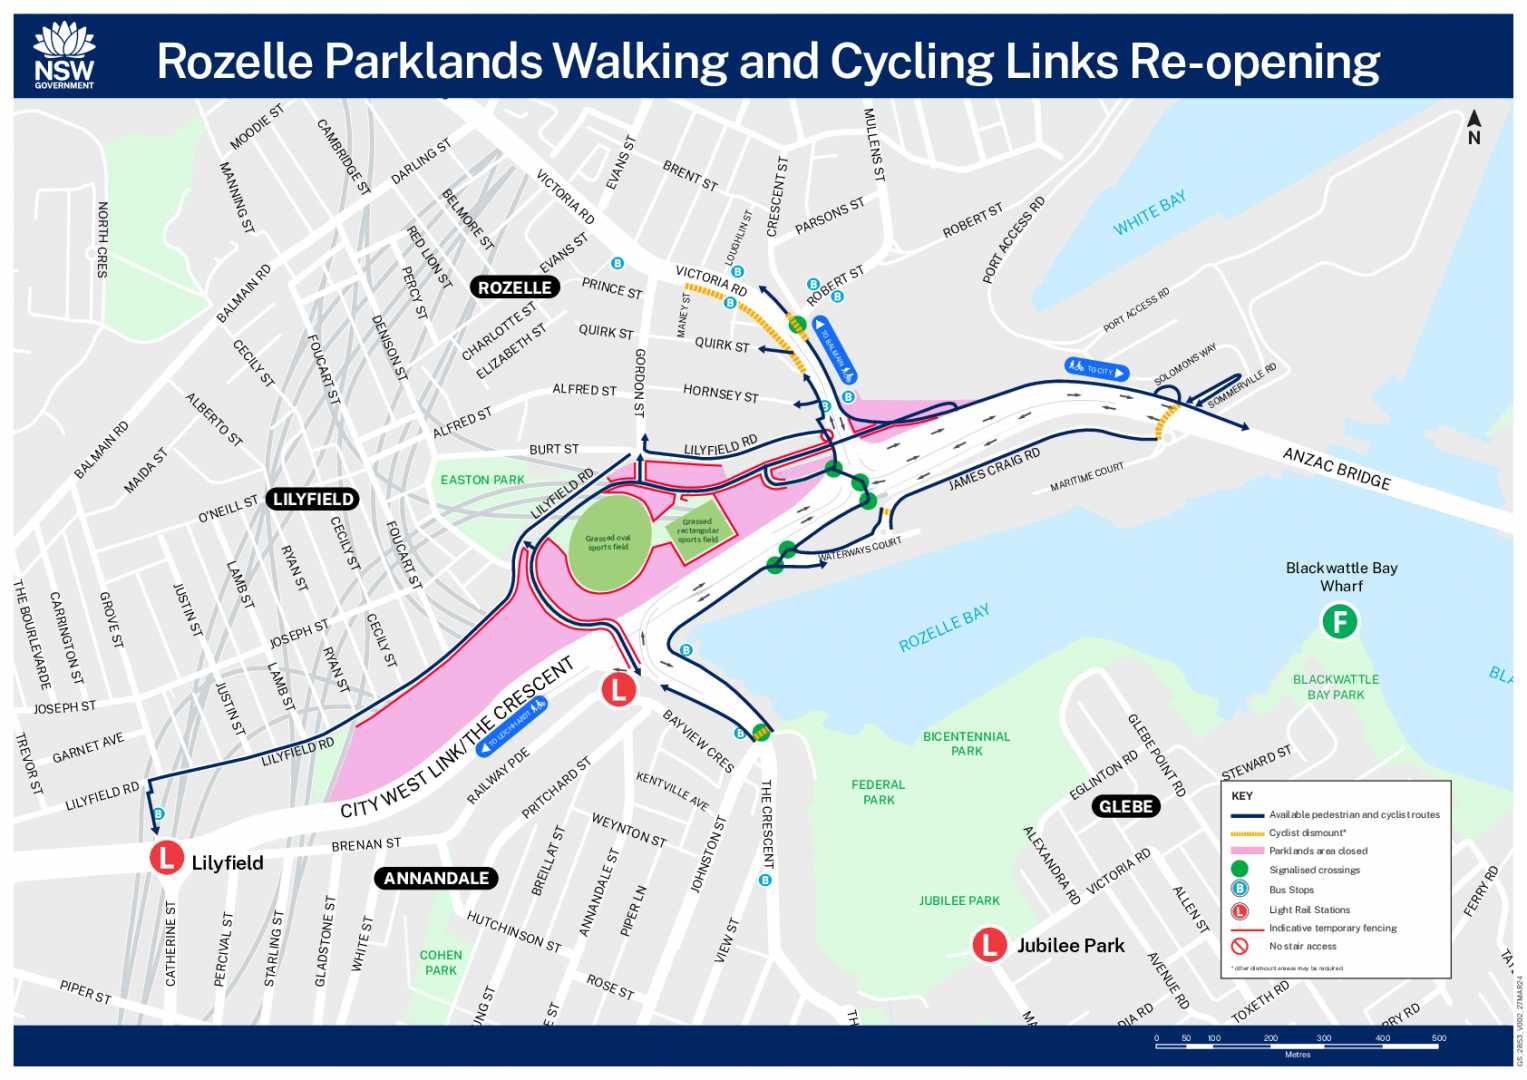 GS_2853_ROZELLE PARKLANDS WALKING AND CYCLING LINKS REOPENING_V002_27MAR24